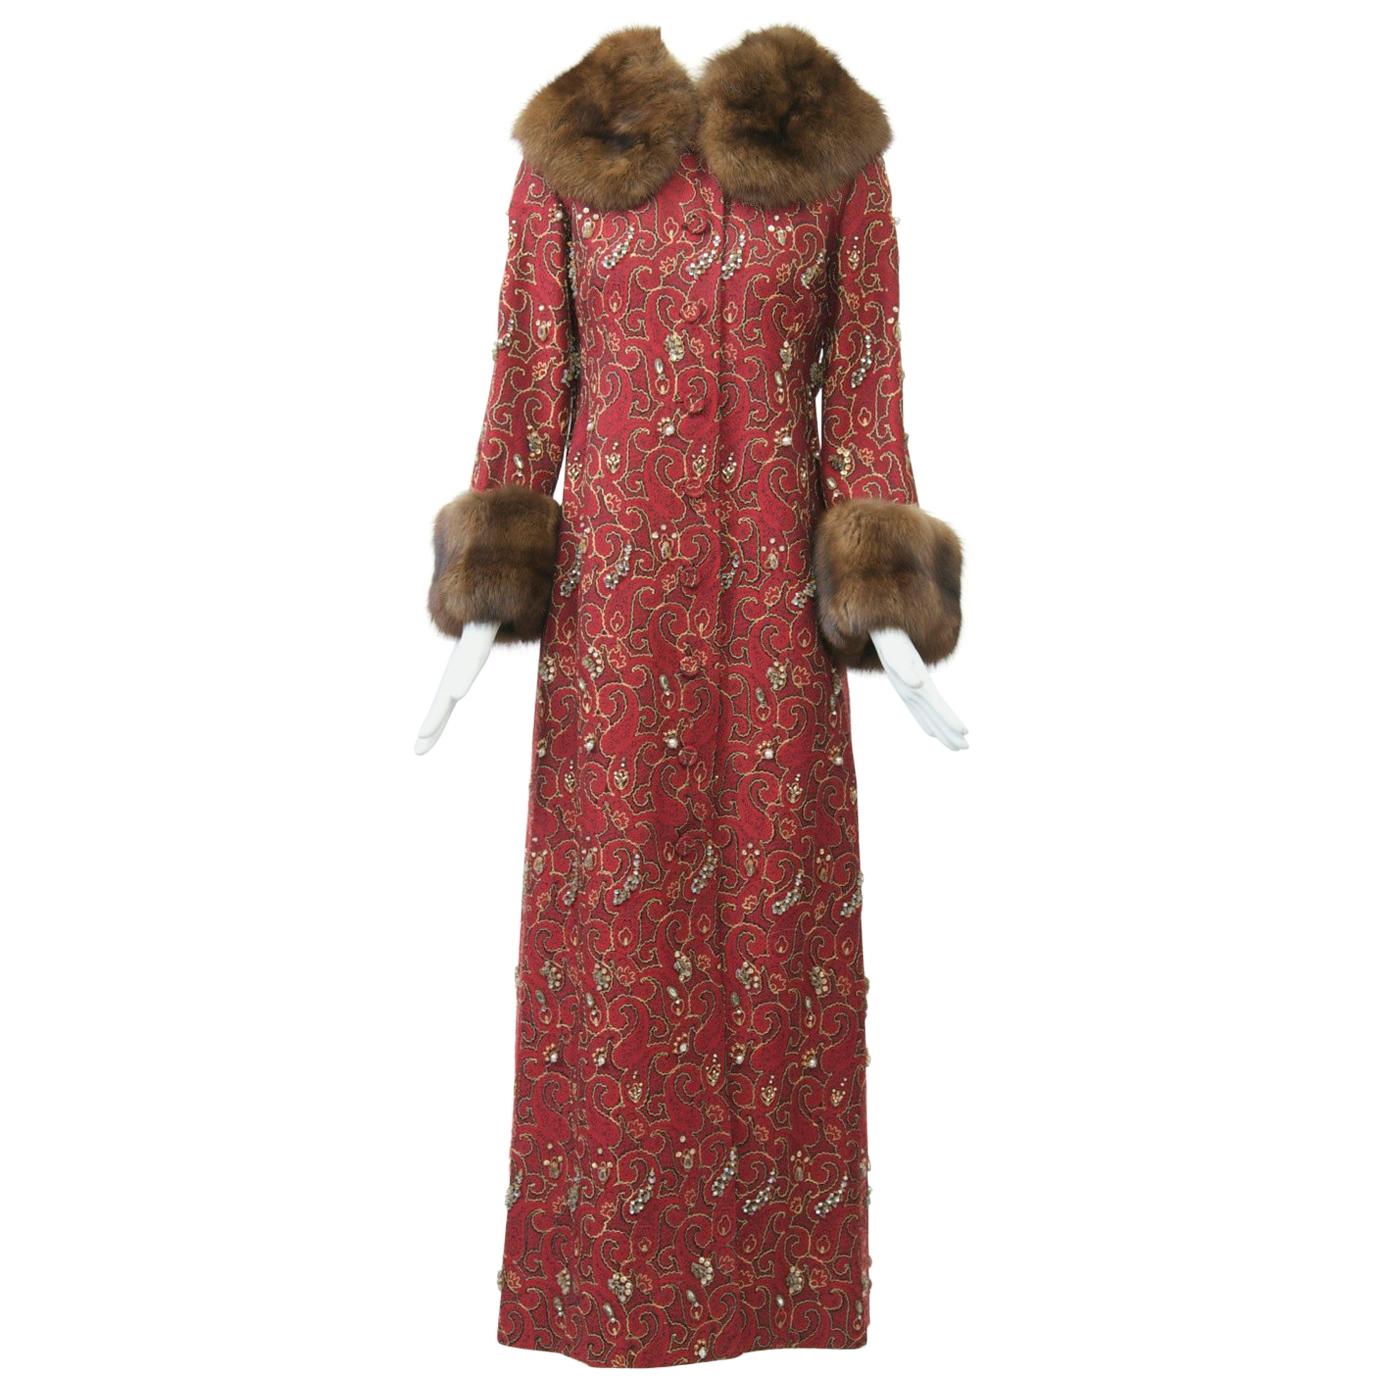 Beaded Red Brocade Evening Coat with Sable Trim